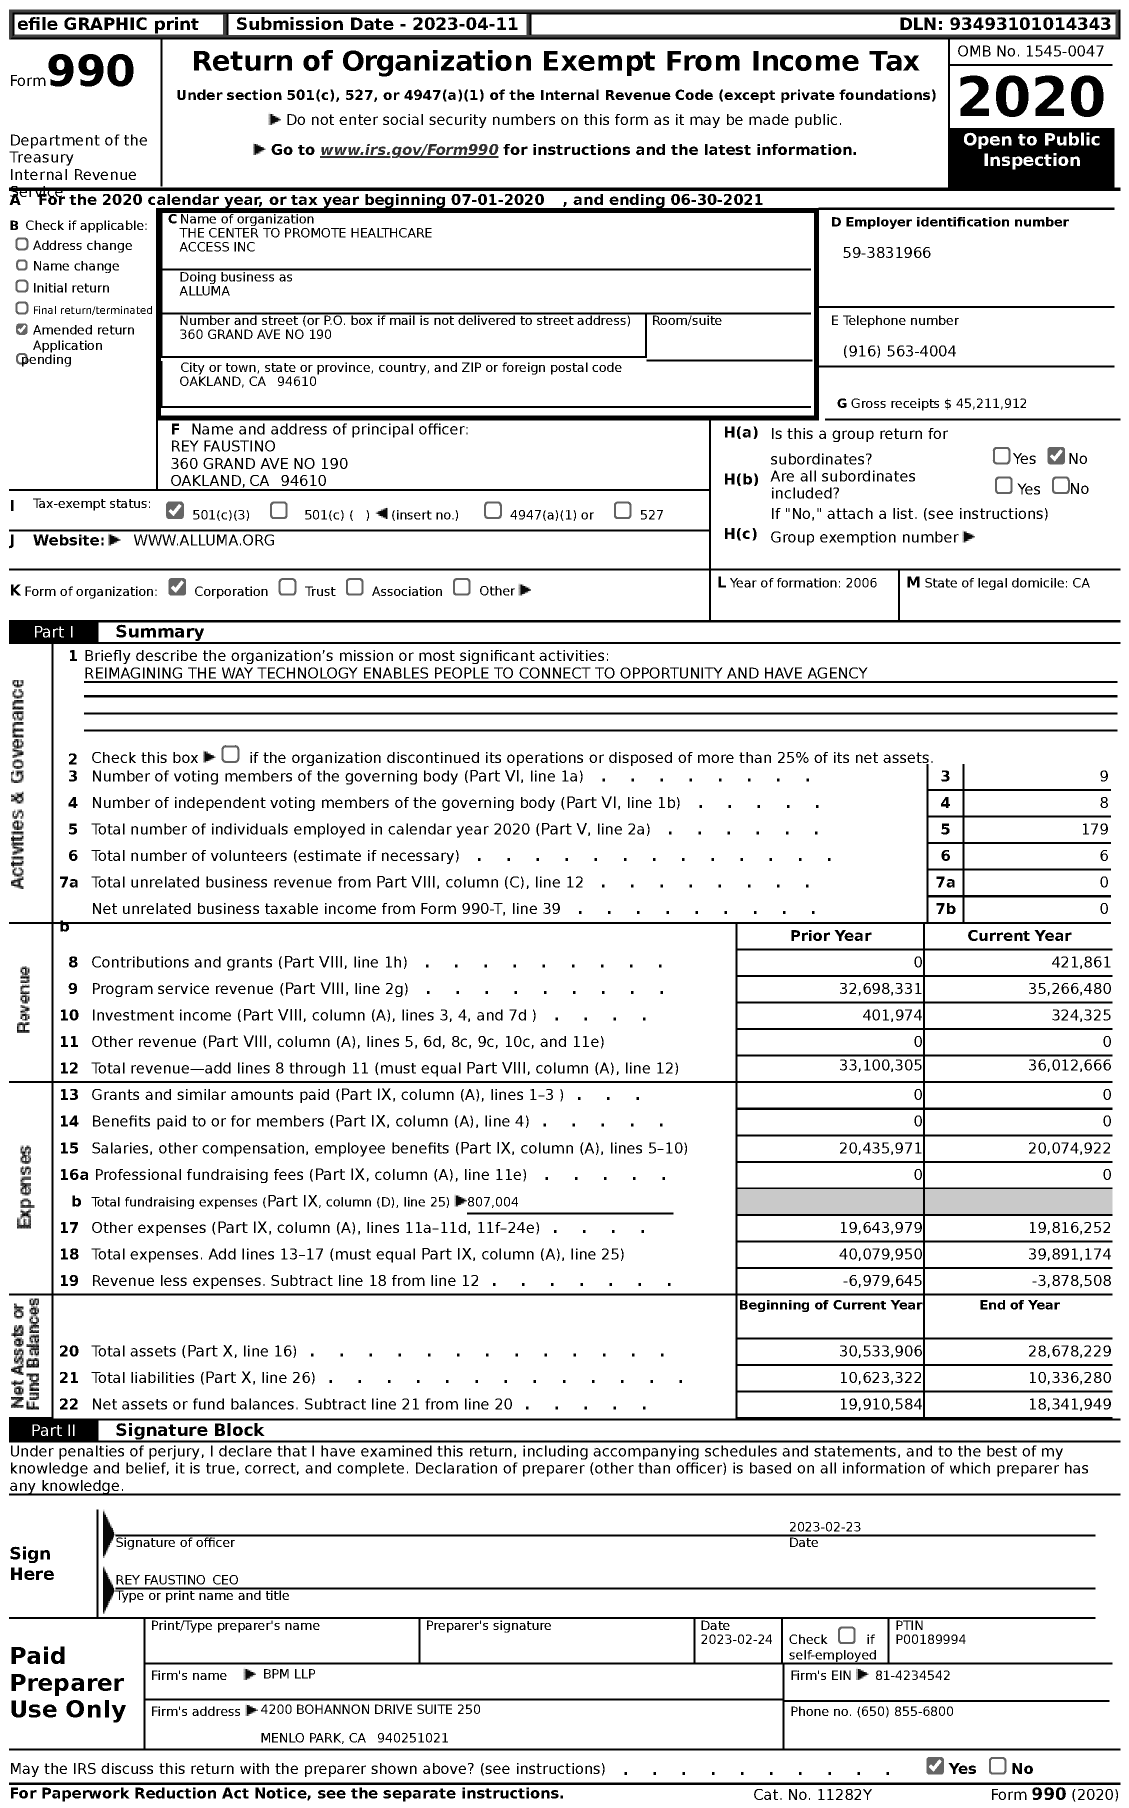 Image of first page of 2020 Form 990 for Alluma / The Center To Promote Healthcare Access Inc (SIS)